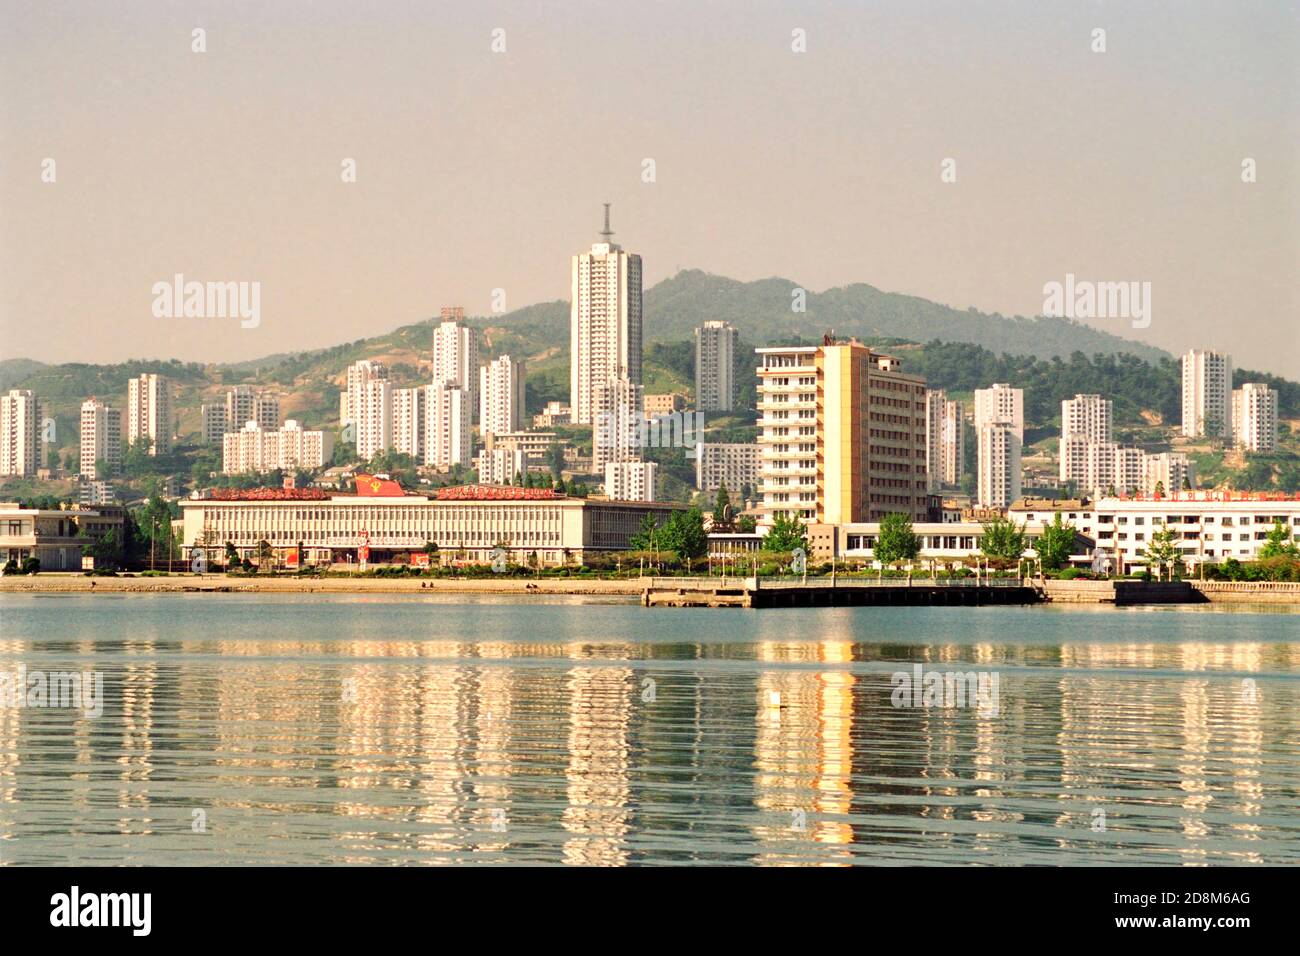 An early morning view of Wonsan, North Korea Stock Photo